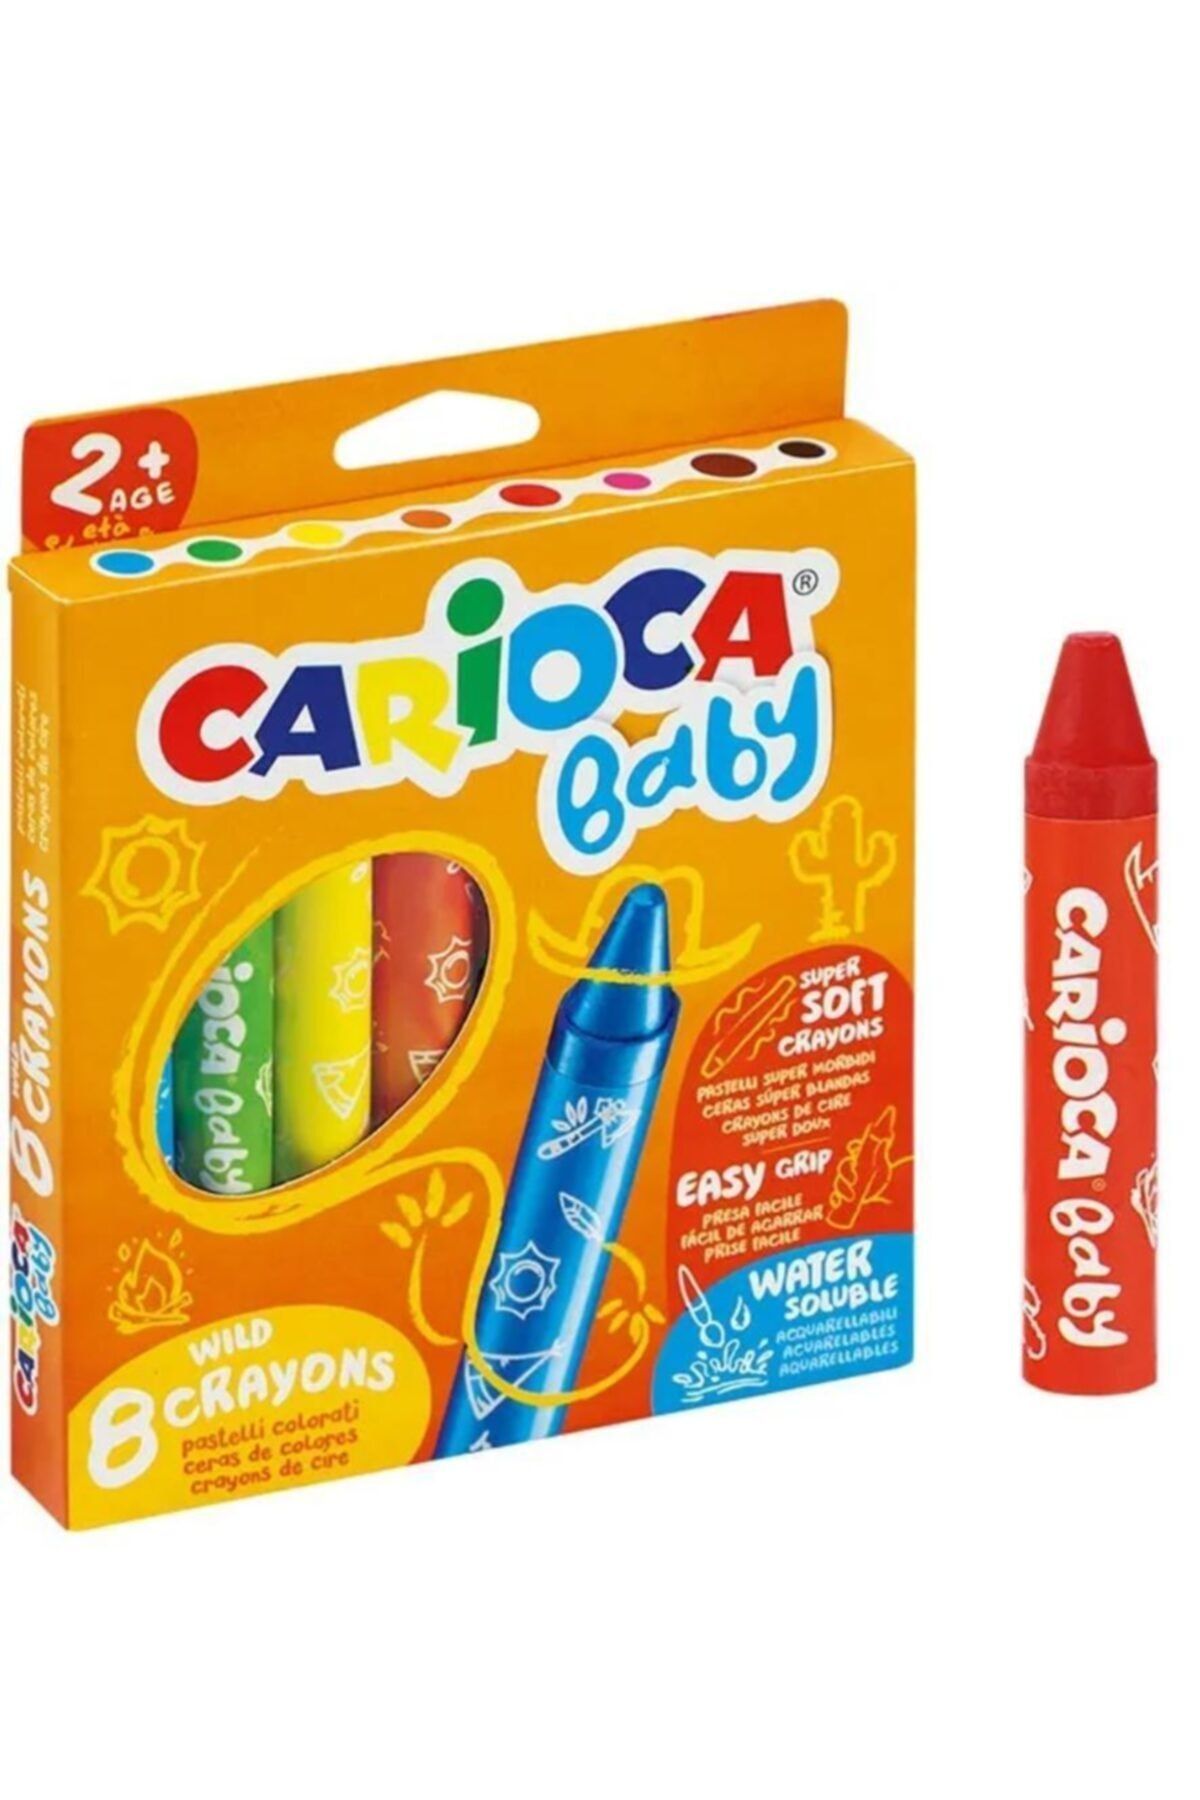 Carioca Jumbo Baby Pastel Crayons That Do Not Contaminate Hands, Pack of 8  - Trendyol